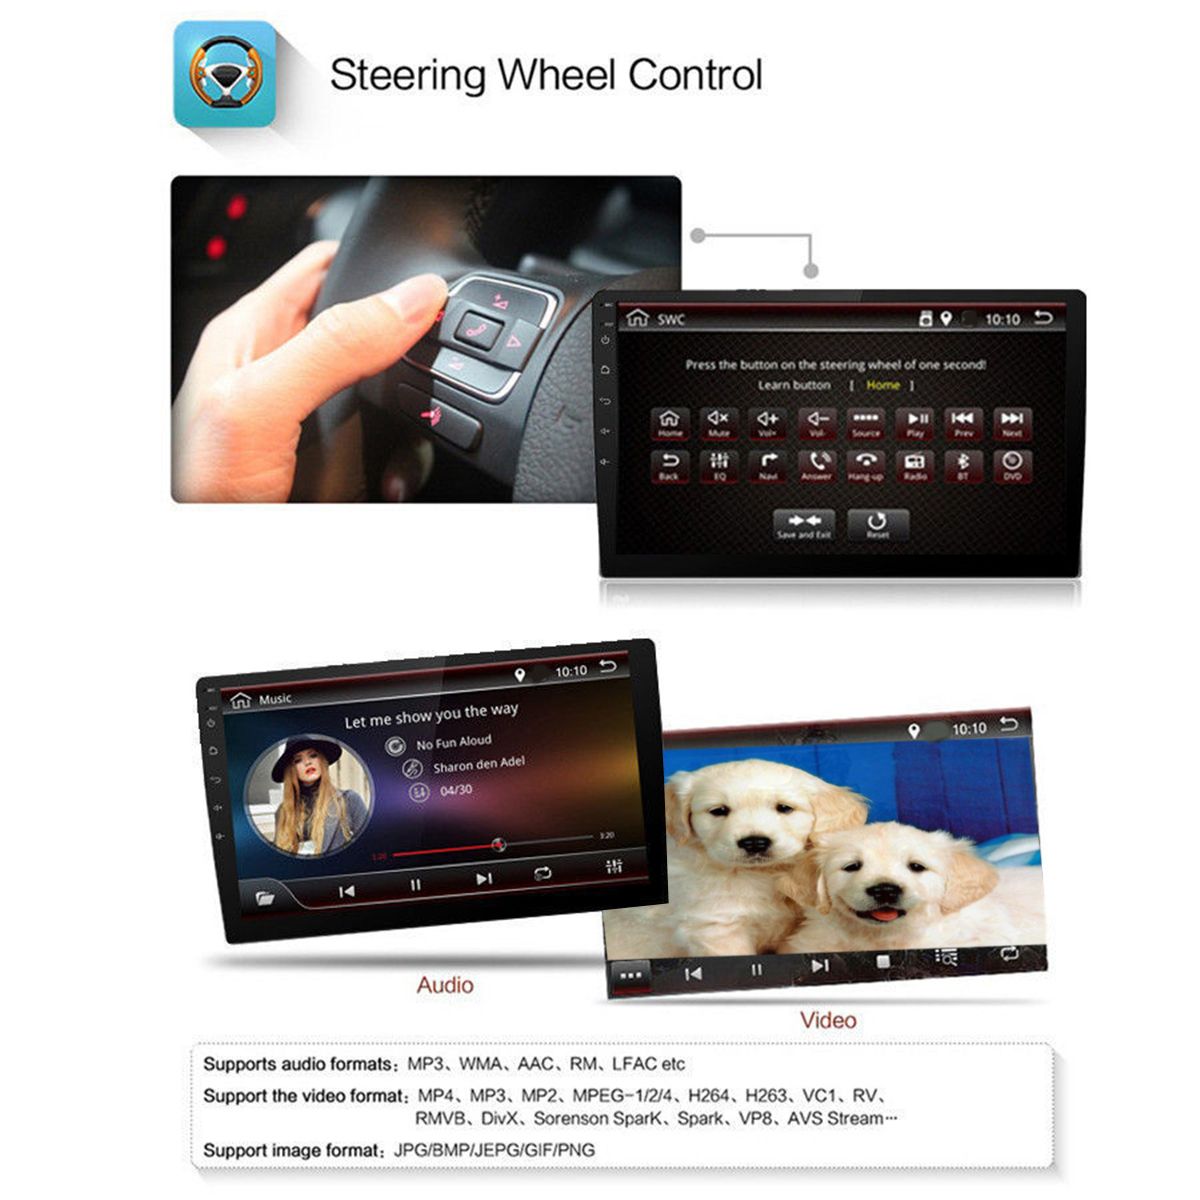 iMars-101Inch-2Din-for-Android-81-Car-Stereo-Radio-116G-IPS-25D-Touch-Screen-MP5-Player-GPS-WIFI-FM--1531819